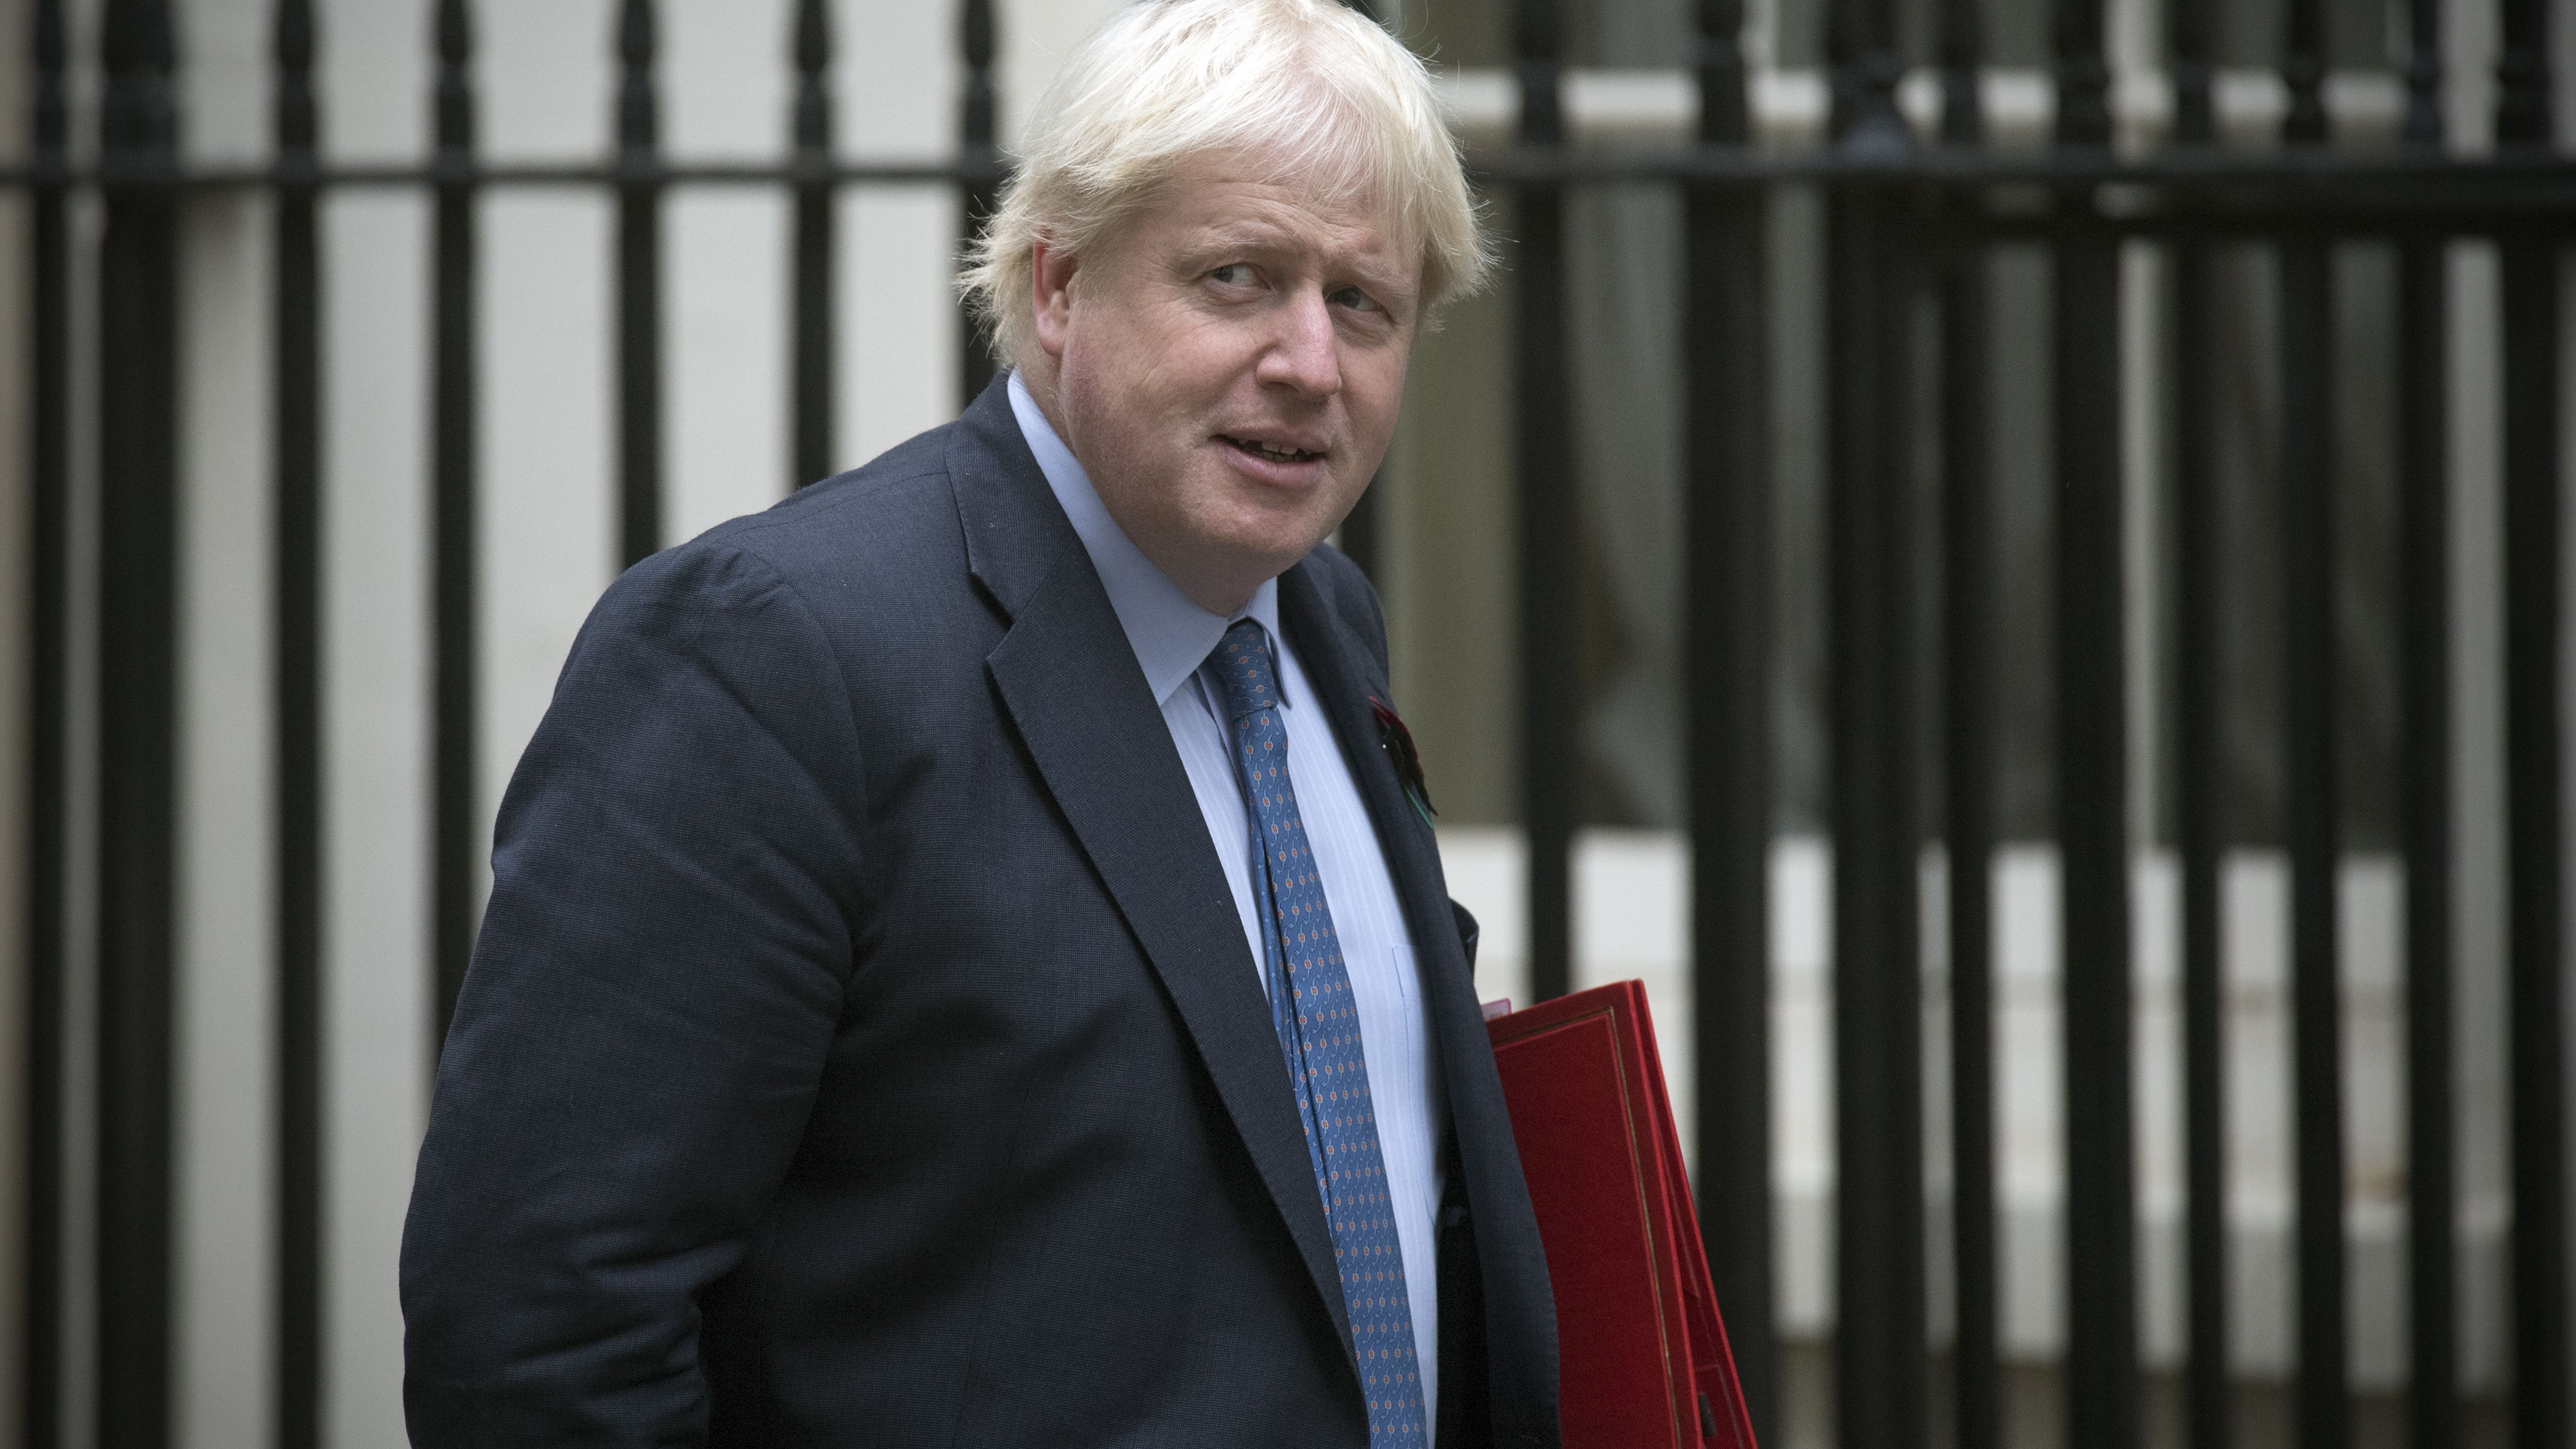 Foreign Secretary Boris Johnson is set to visit Iran before the end of the year.